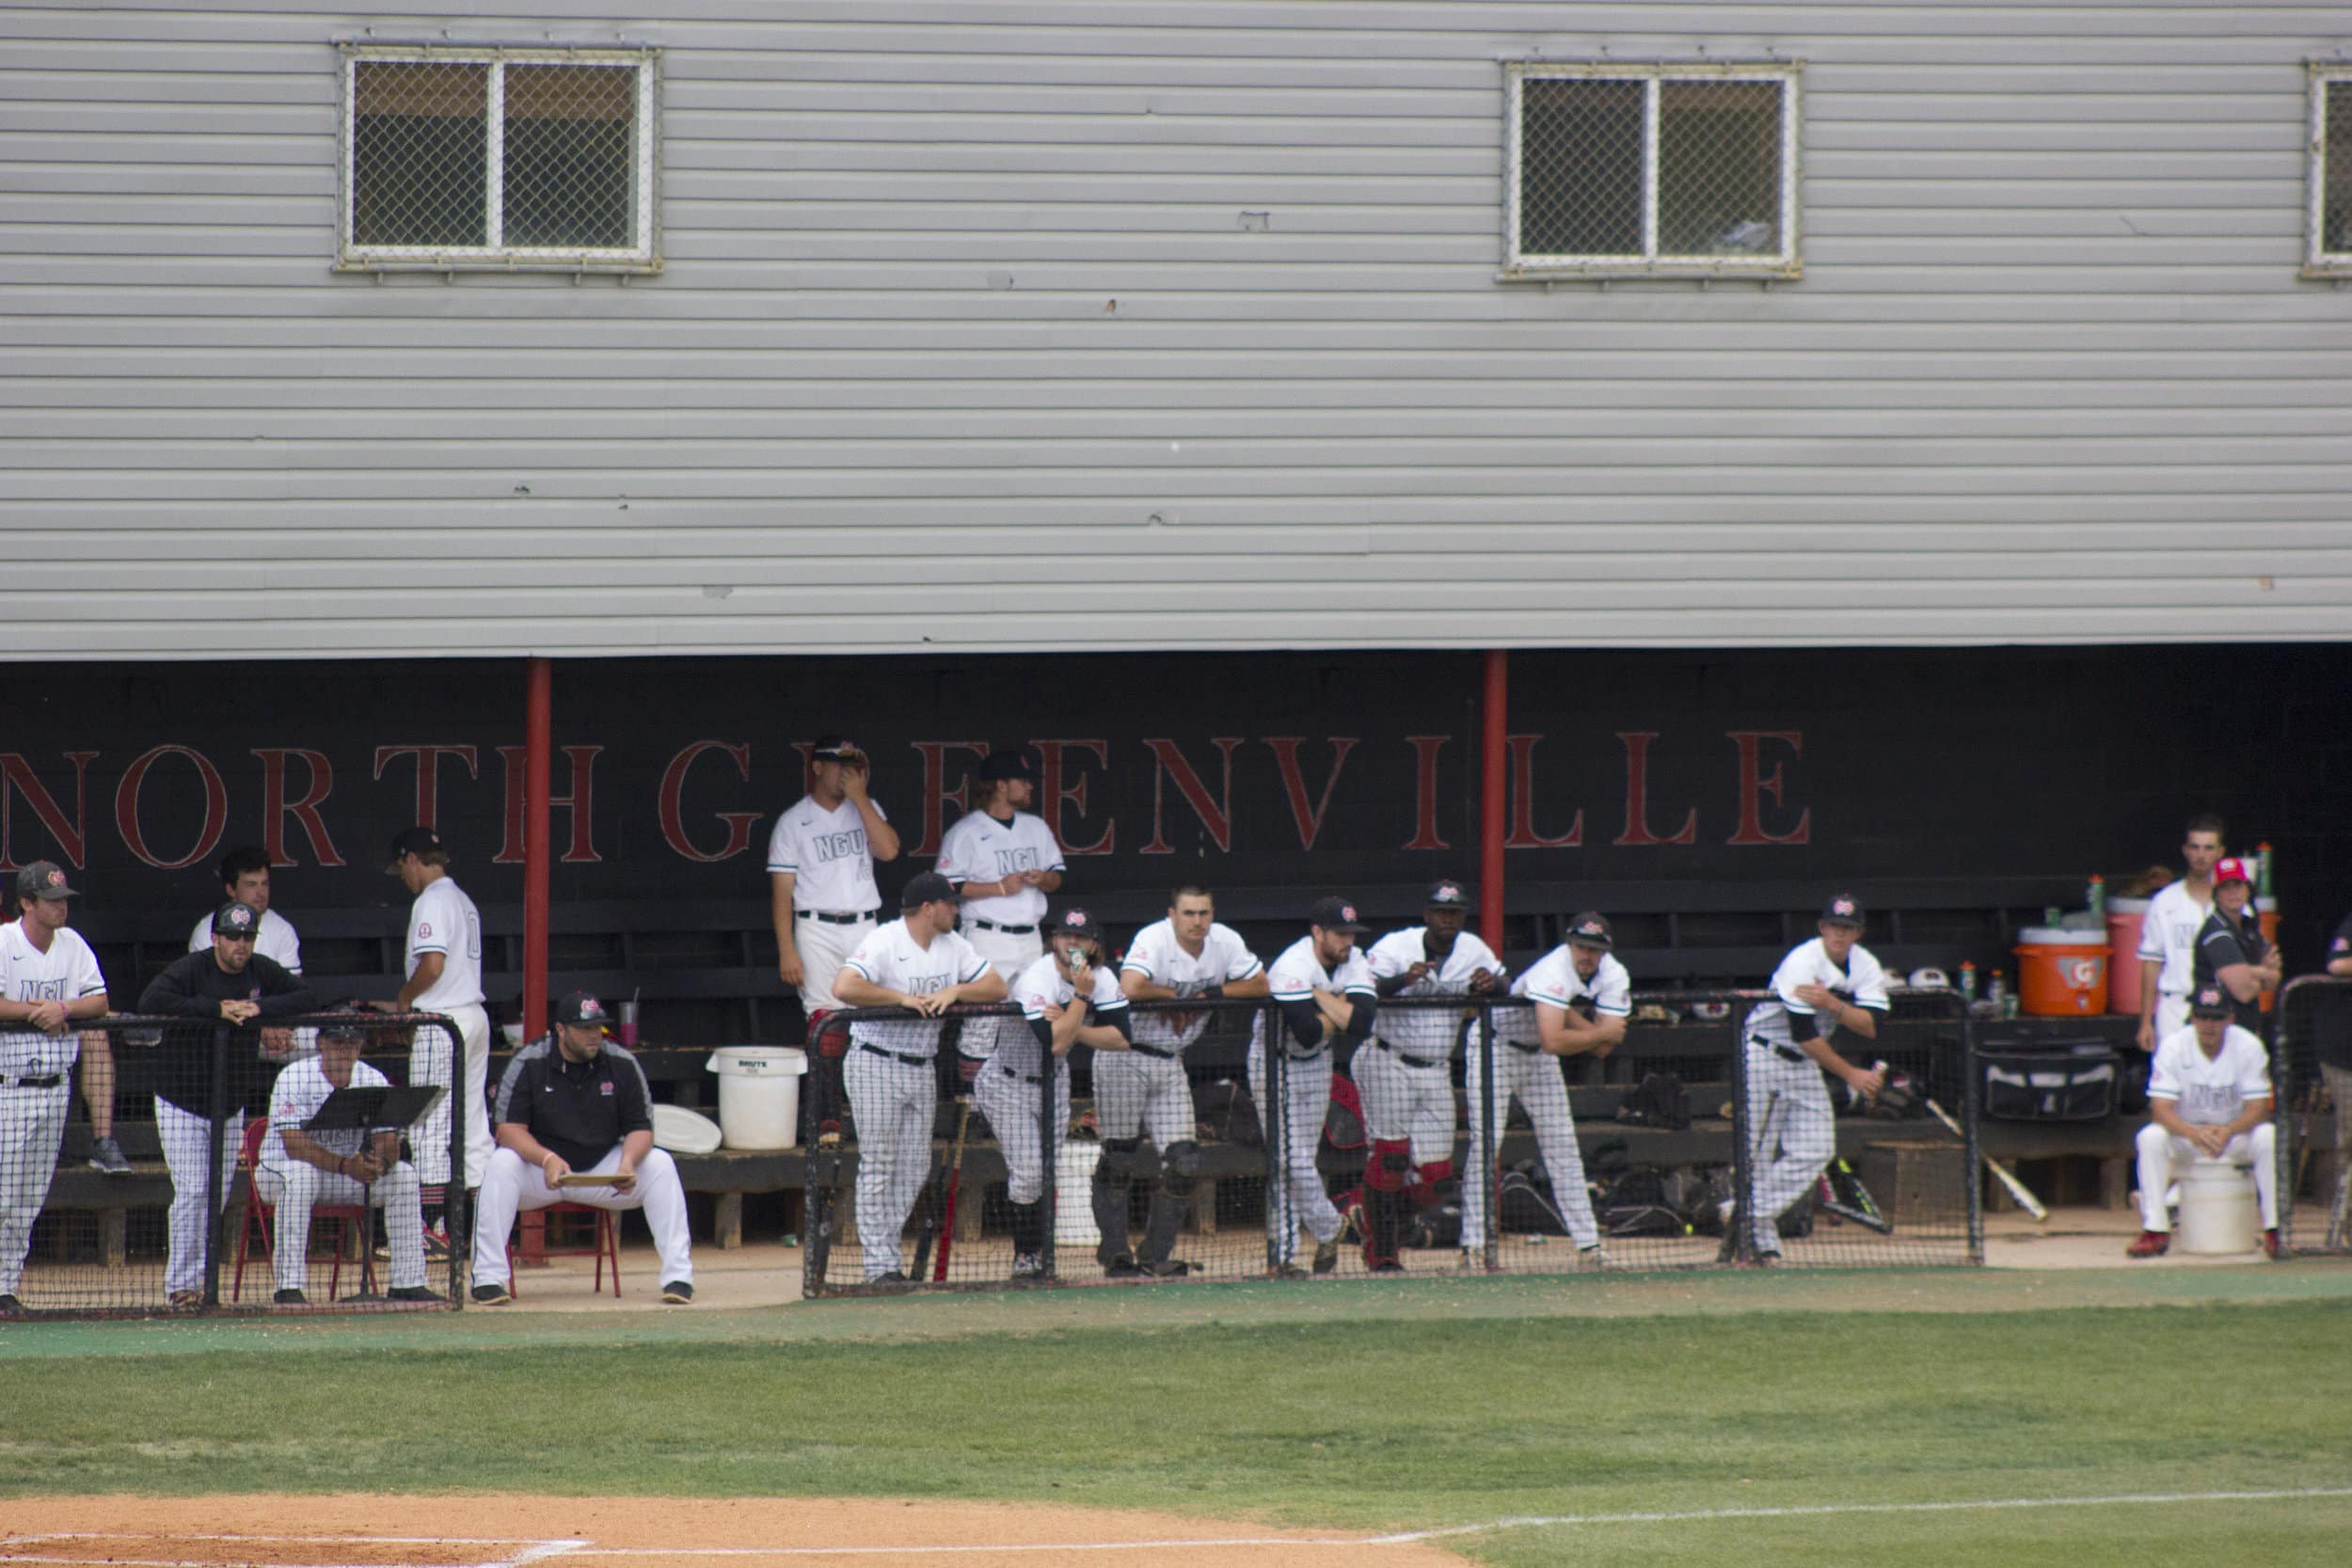 The NGU dugout is set to cheer on their teammate during an at bat.